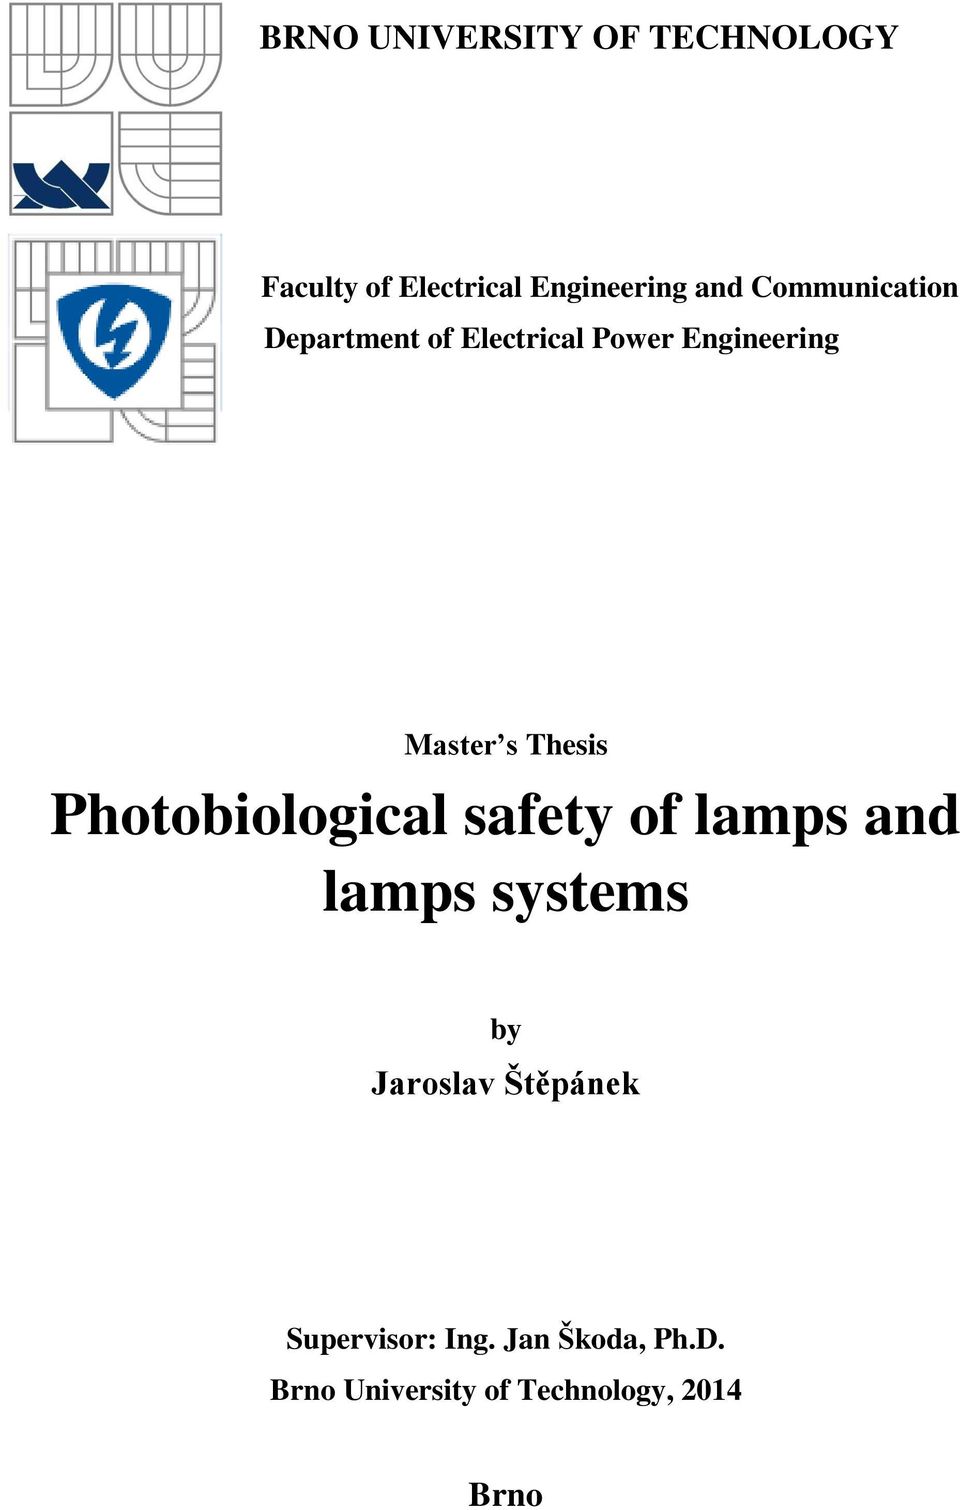 Thesis Photobiological safety of lamps and lamps systems by Jaroslav